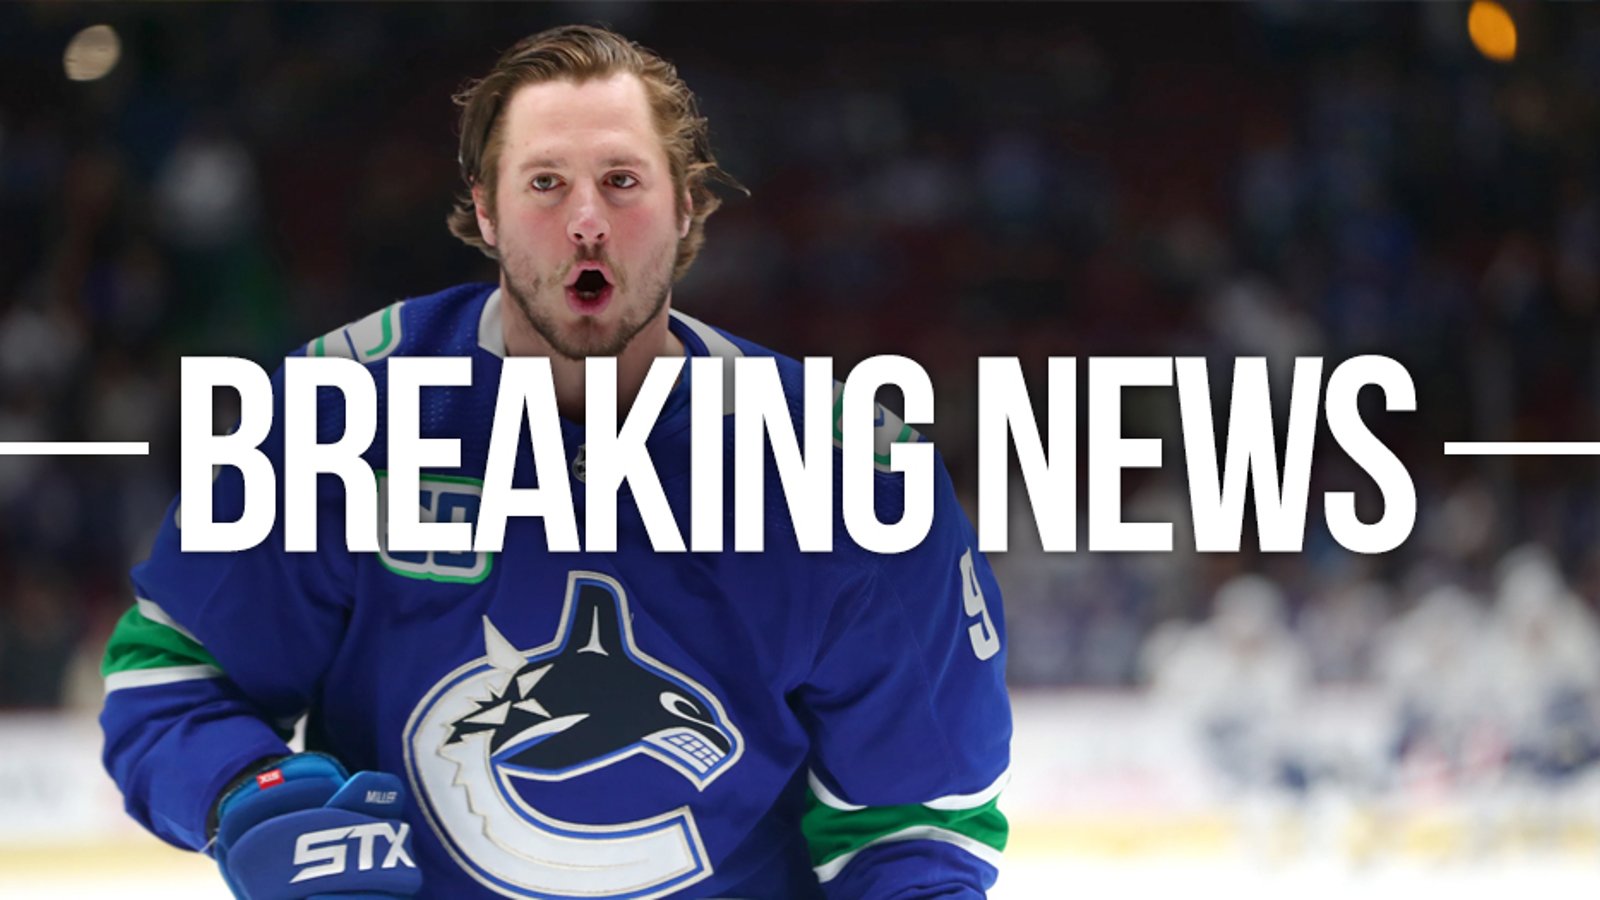 Canucks reportedly pull J.T. Miller from the lineup just minutes before game time